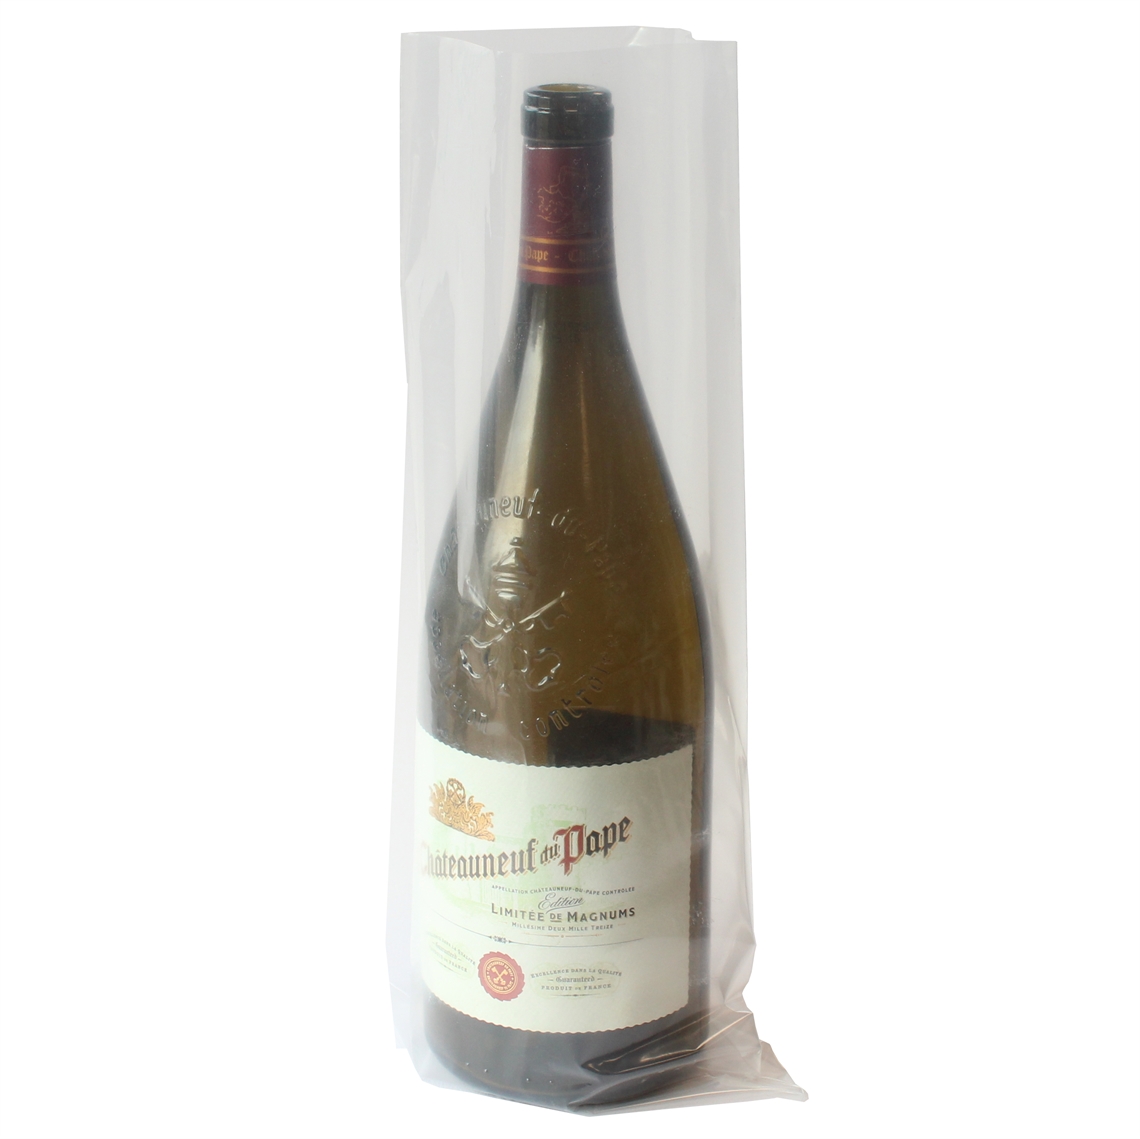 View more air conditioning from our Wine Bottle Cellar Sleeves range